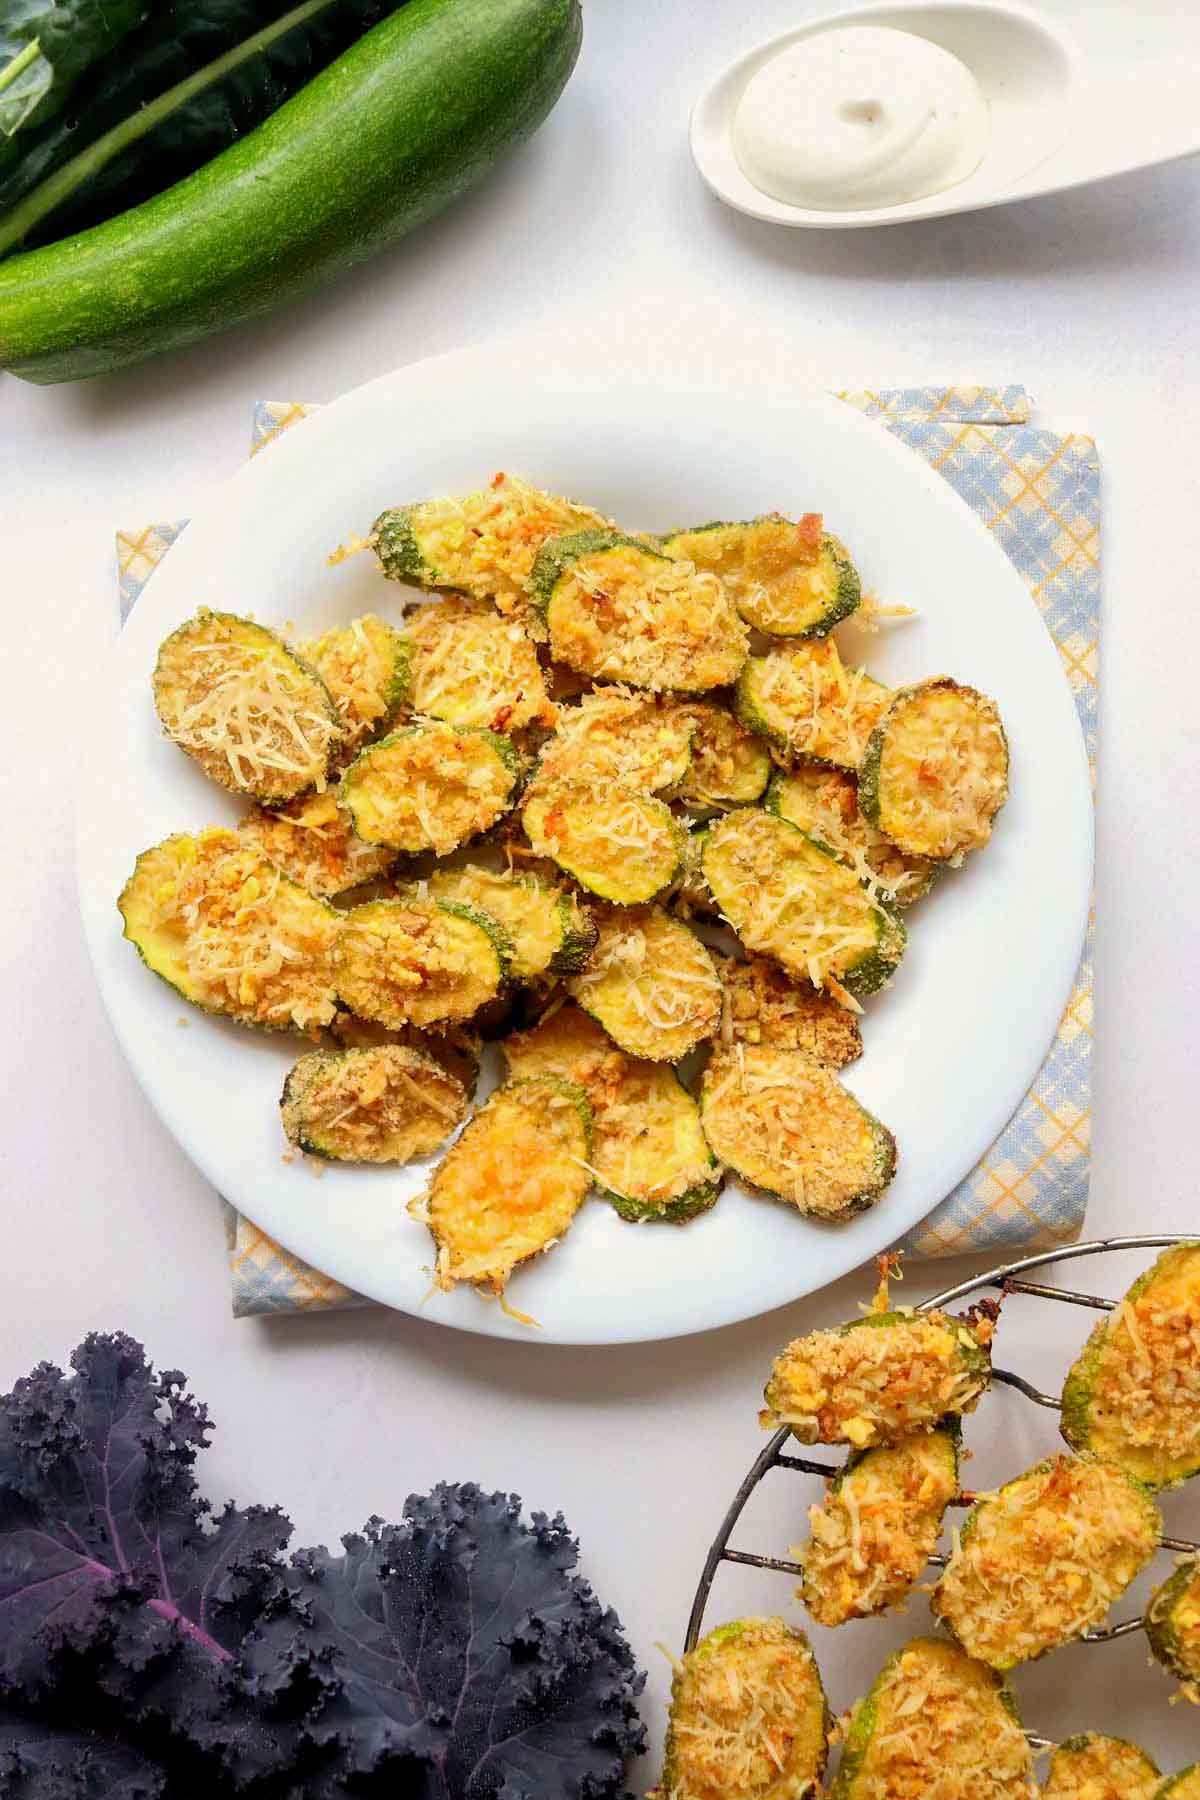 Zucchini chips on a plate that is set on a kitchen towel.